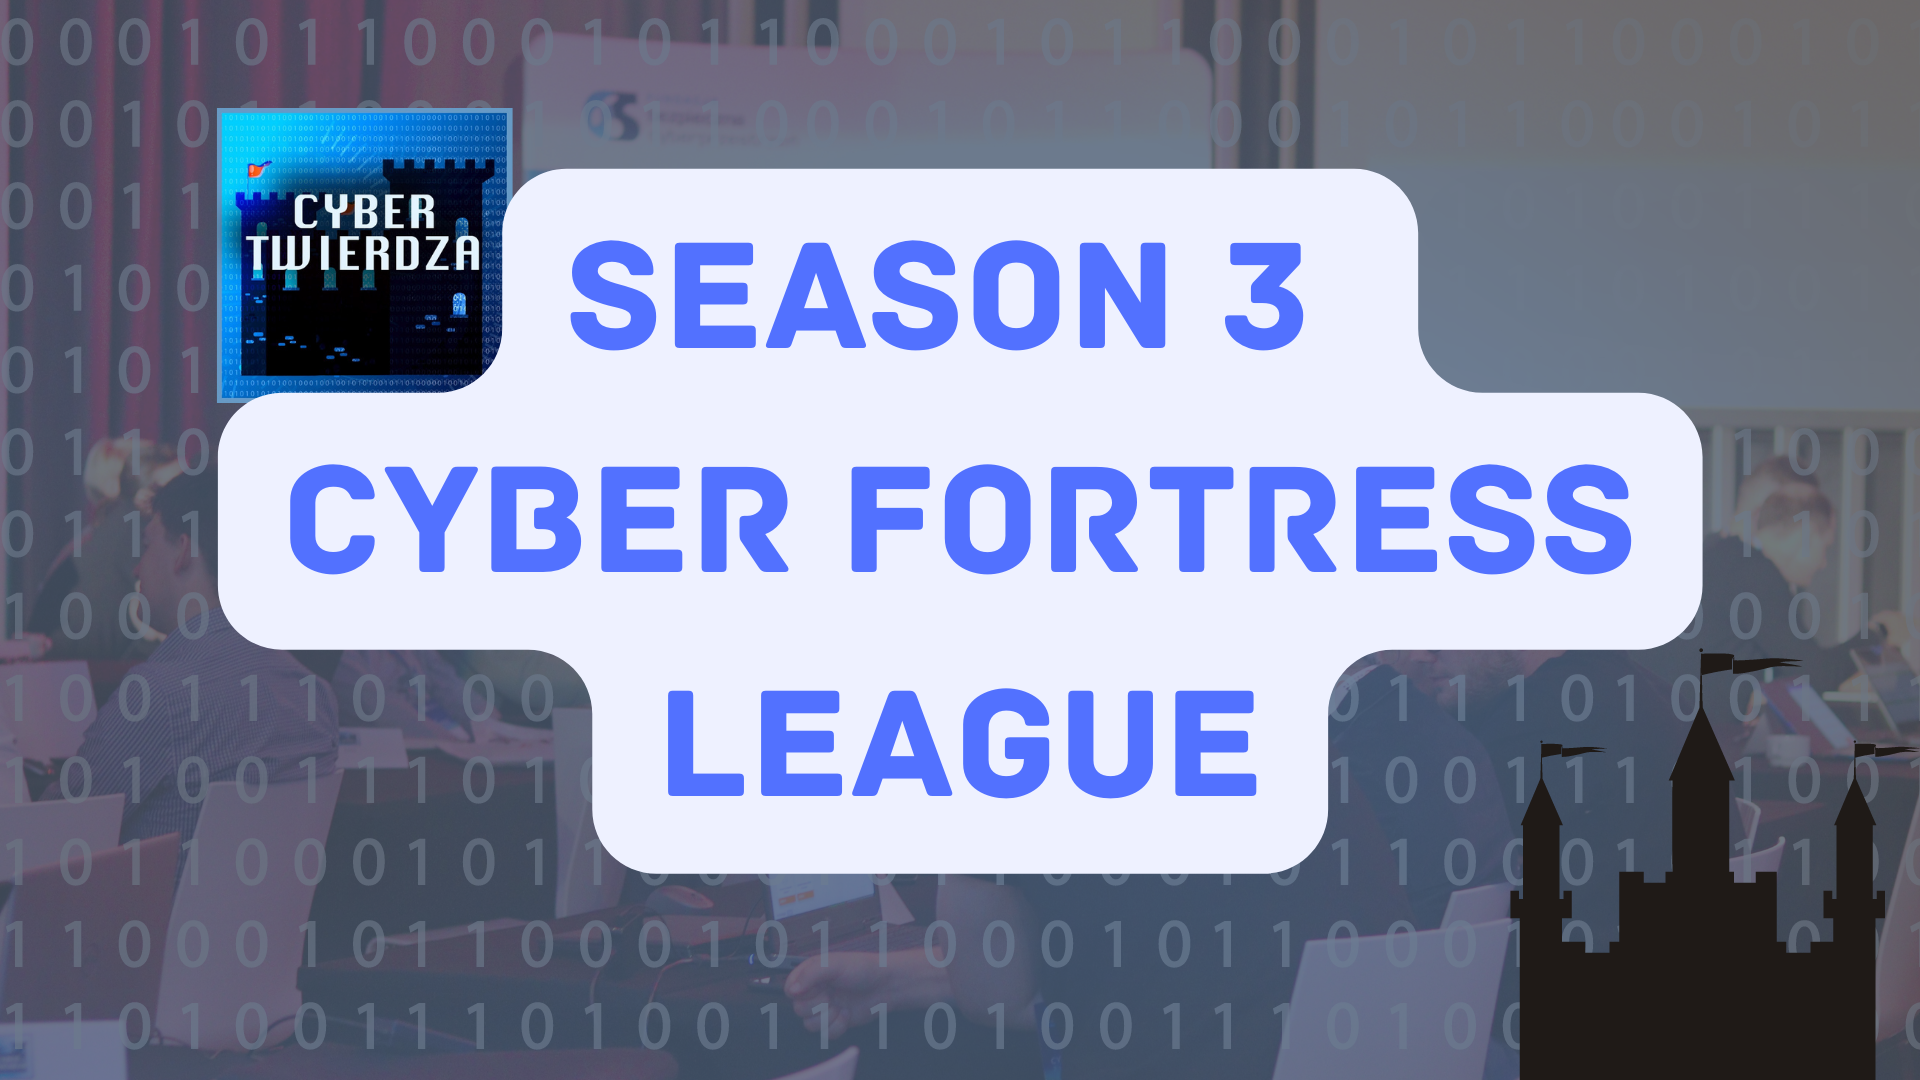 Announcement regarding the start of Season 3 of the Cyber Fortress League